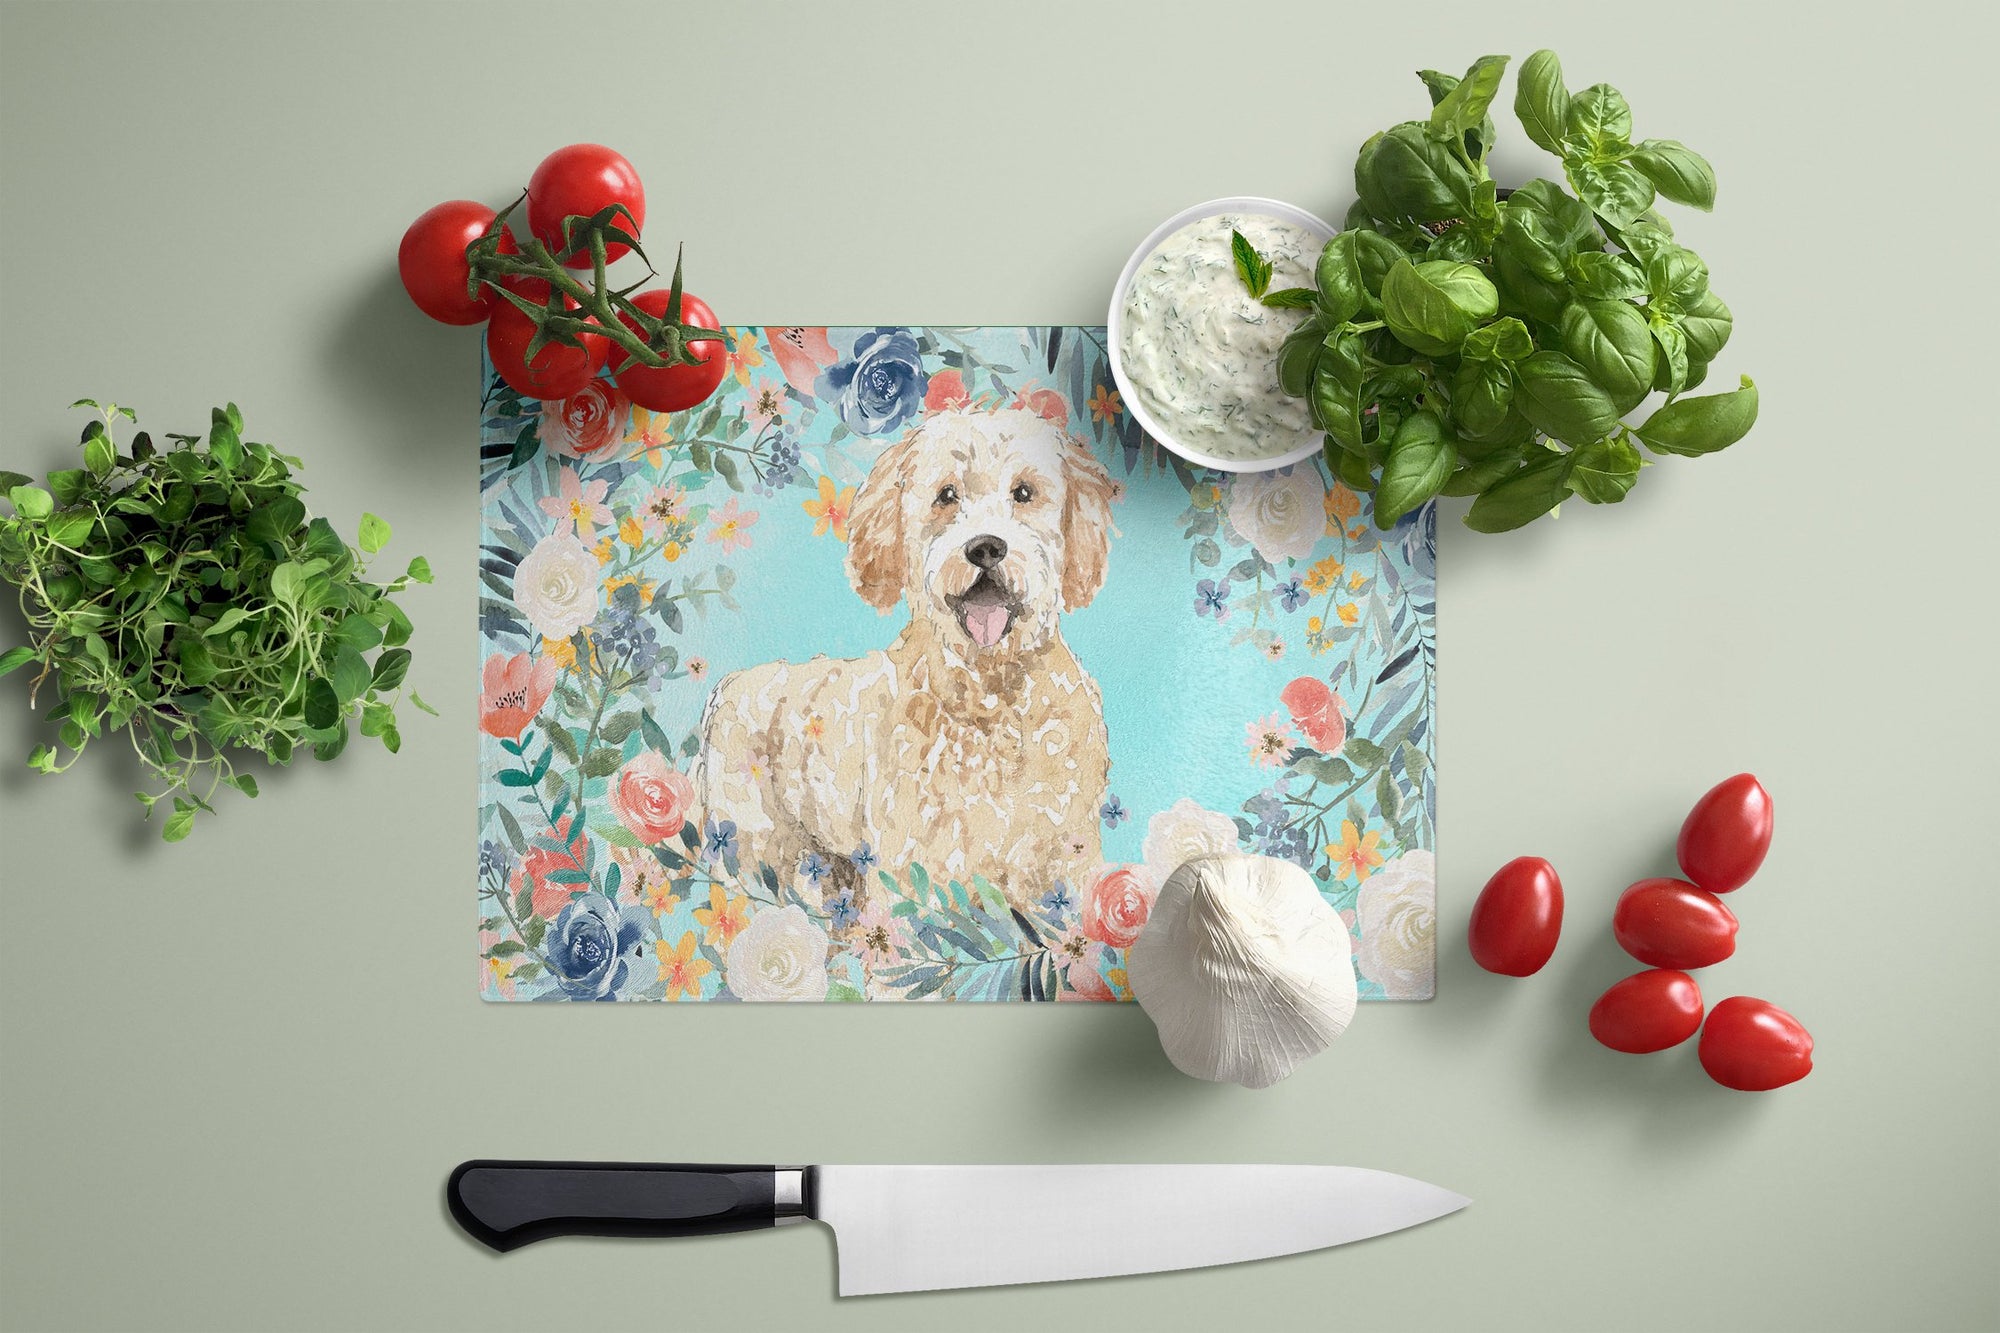 Goldendoodle Glass Cutting Board Large CK3426LCB by Caroline's Treasures